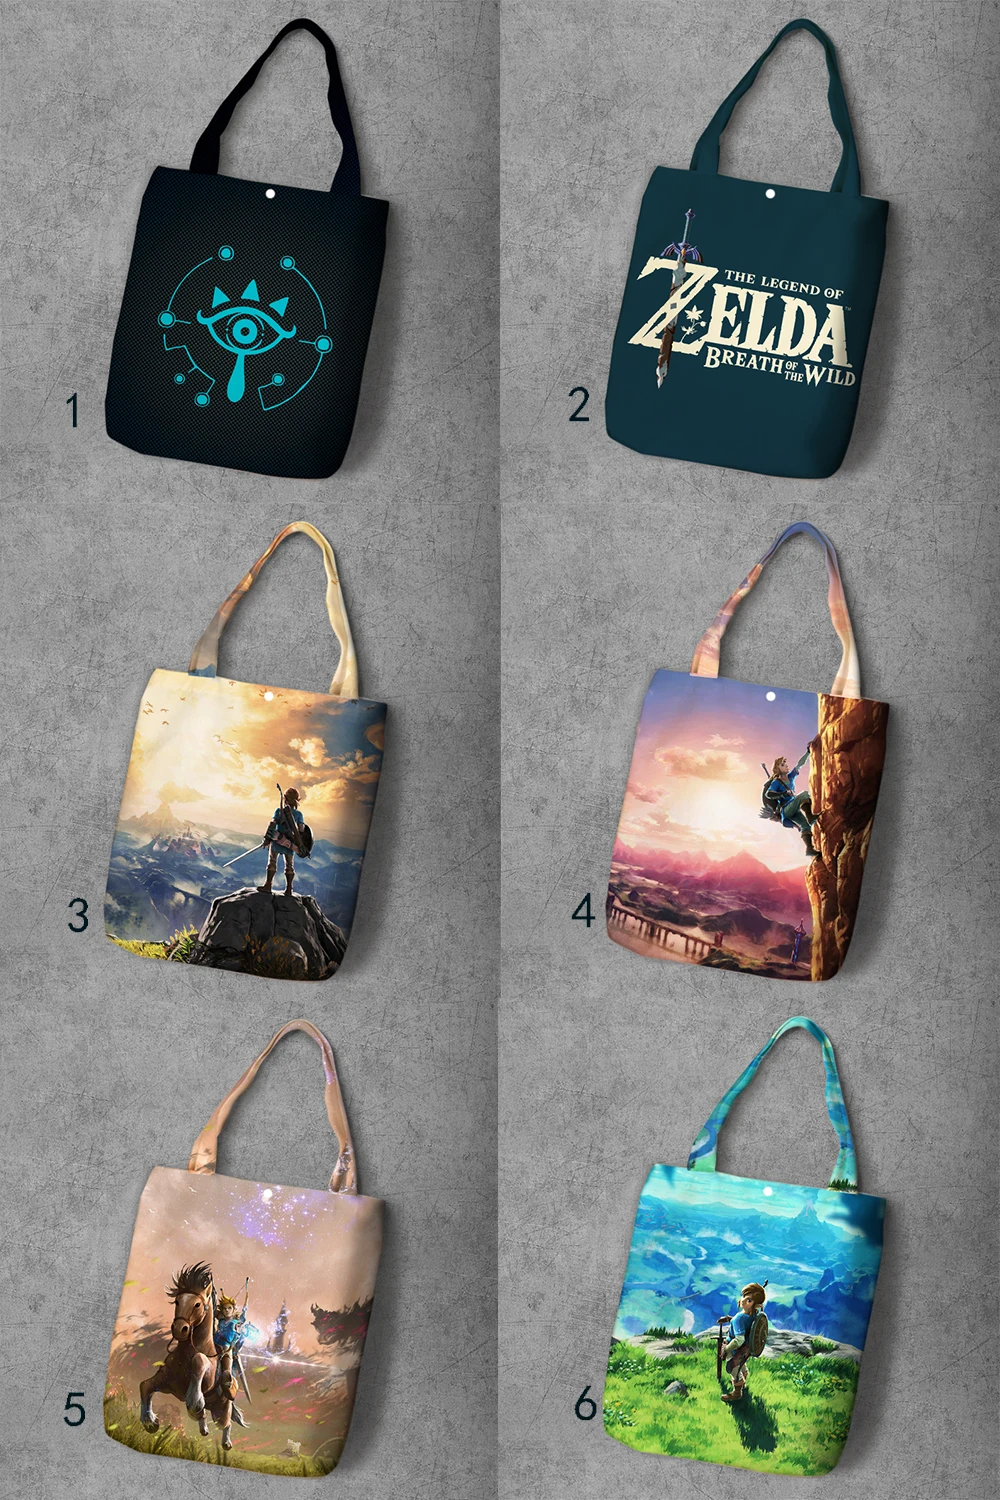 

The Link Zelda Cartoon Printed Recycle Canvas Shopping Bag Large Capacity Customize Tote Fashion Lady Casual Shoulder Bags